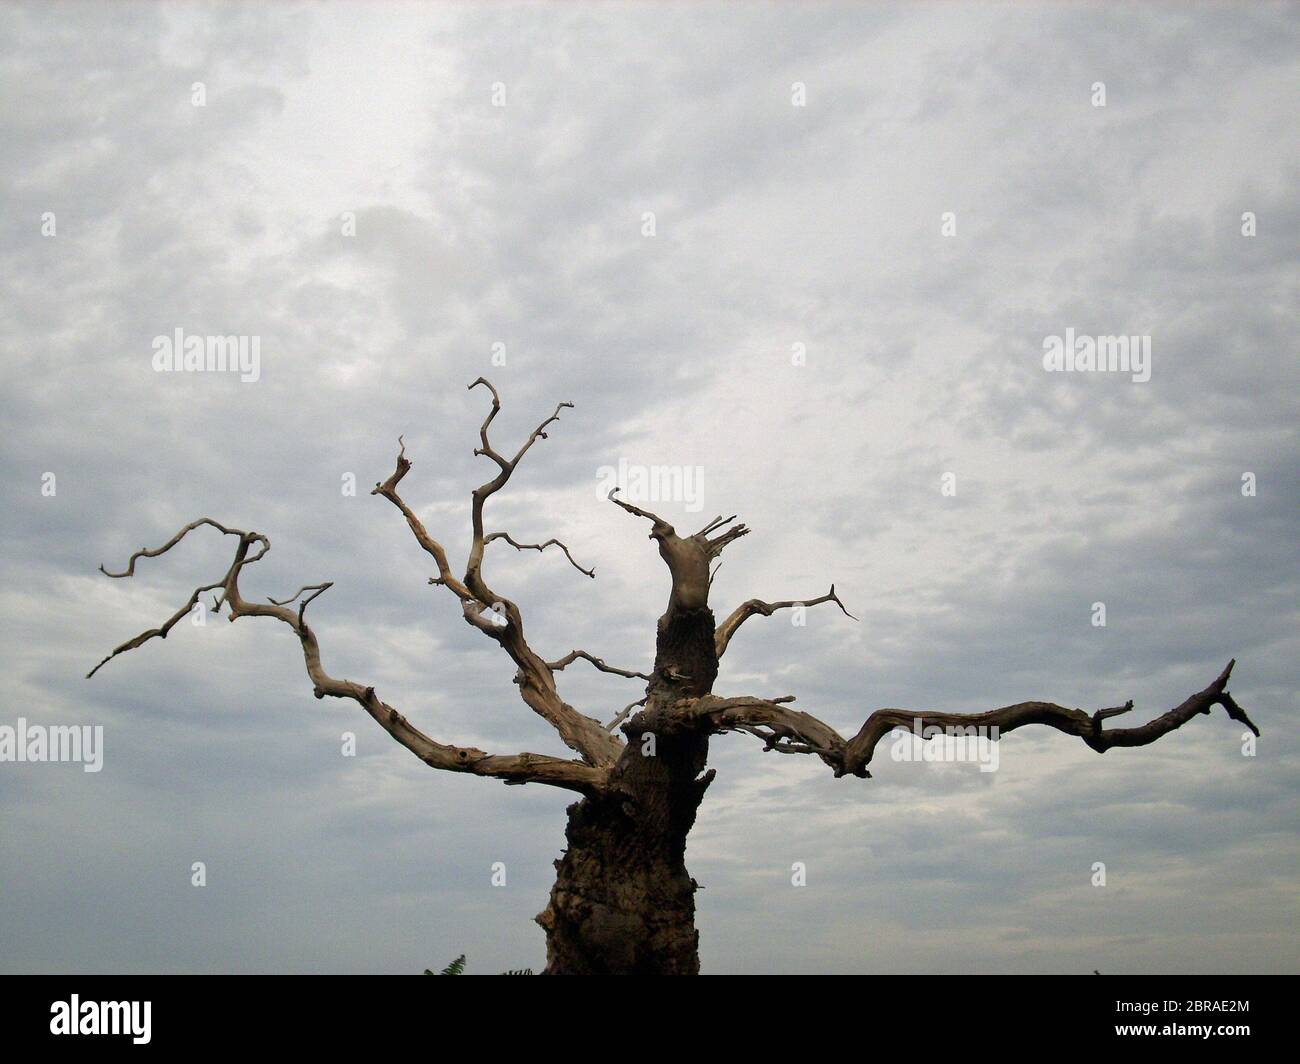 Dead tree with peeling bark and broken branches. Background of grey and leaden sky. Stock Photo